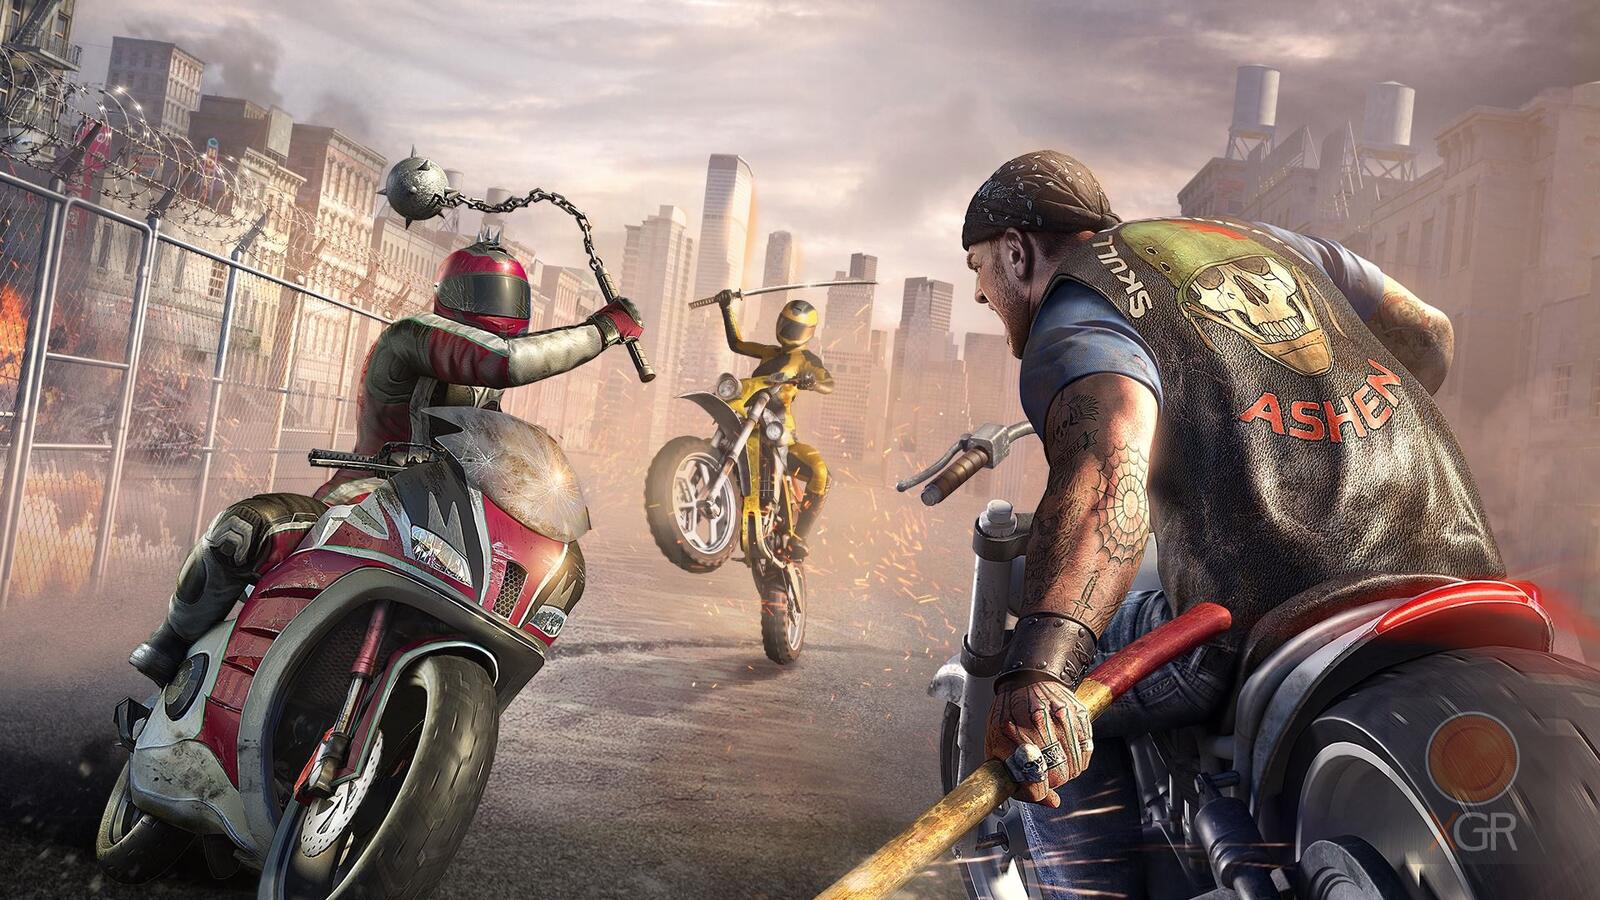 Wallpapers road rage games the 2018 Games on the desktop